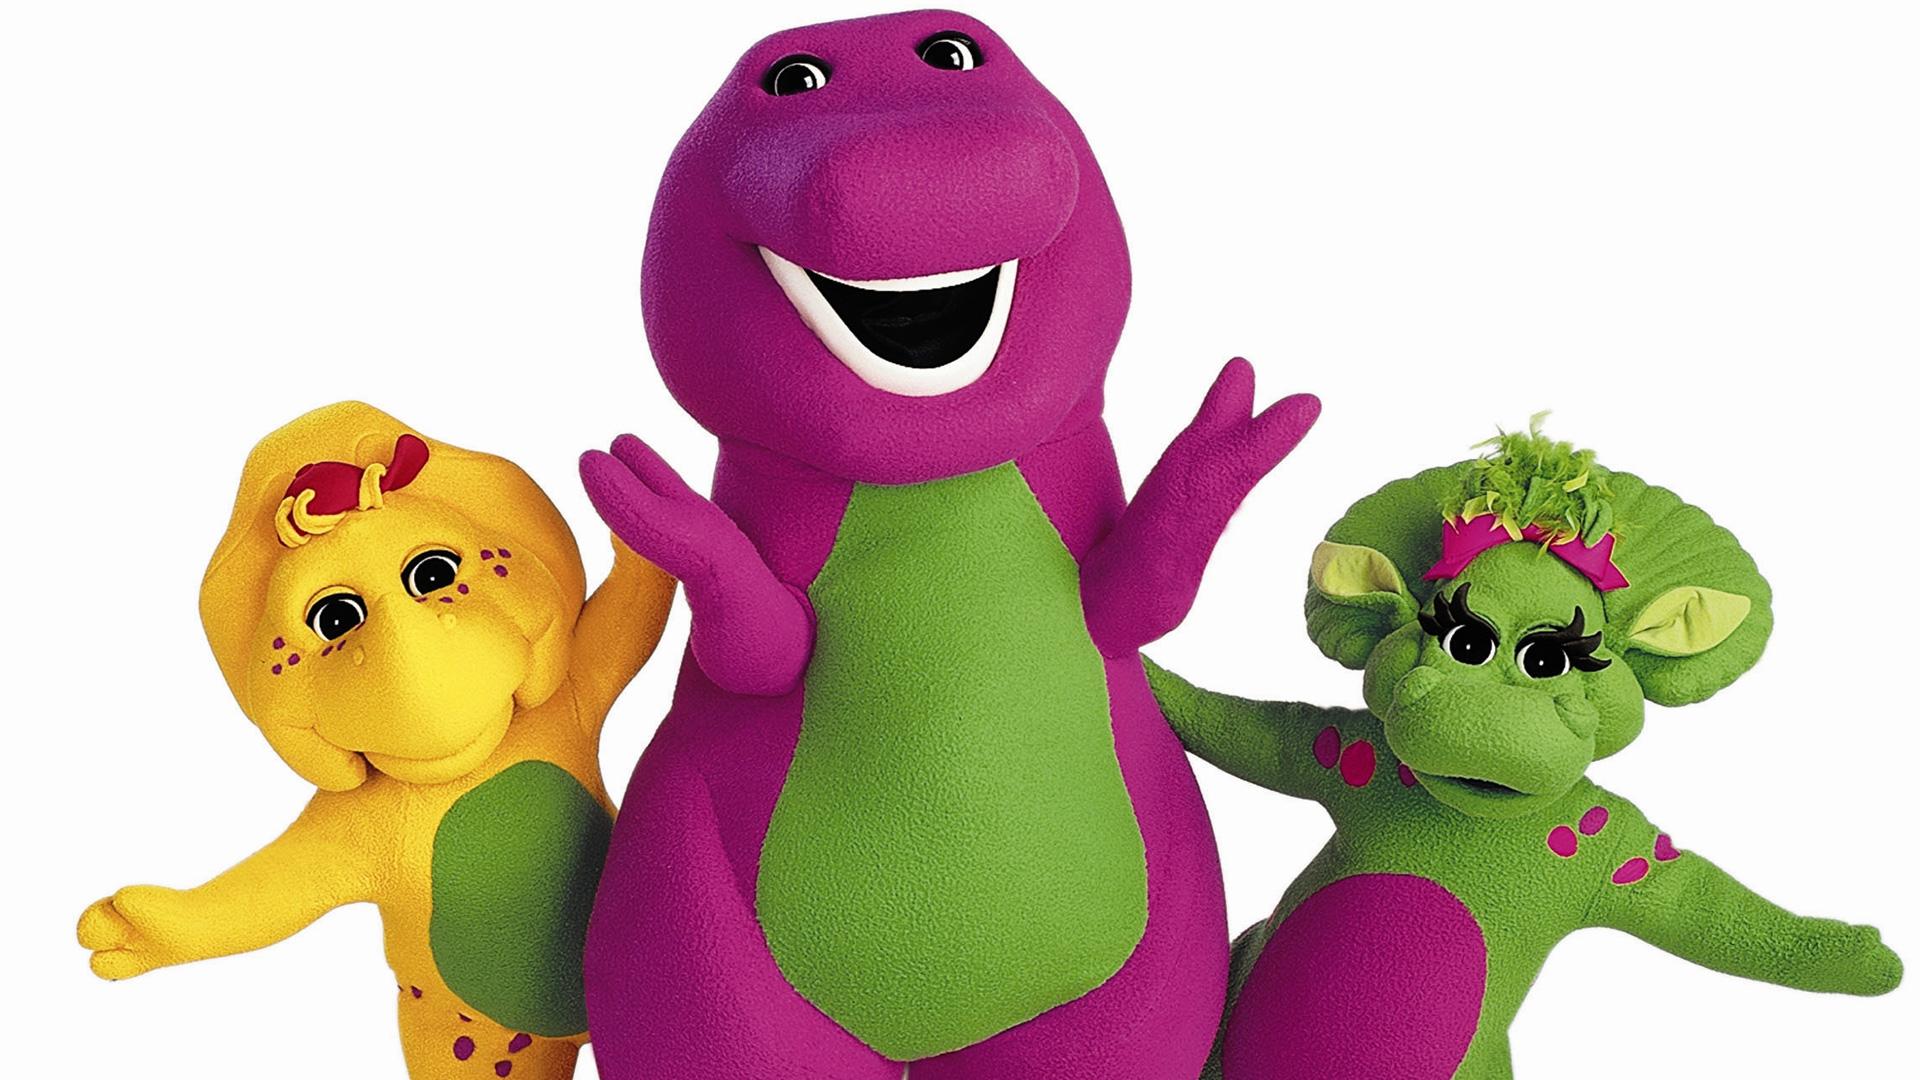 Barney and Friends